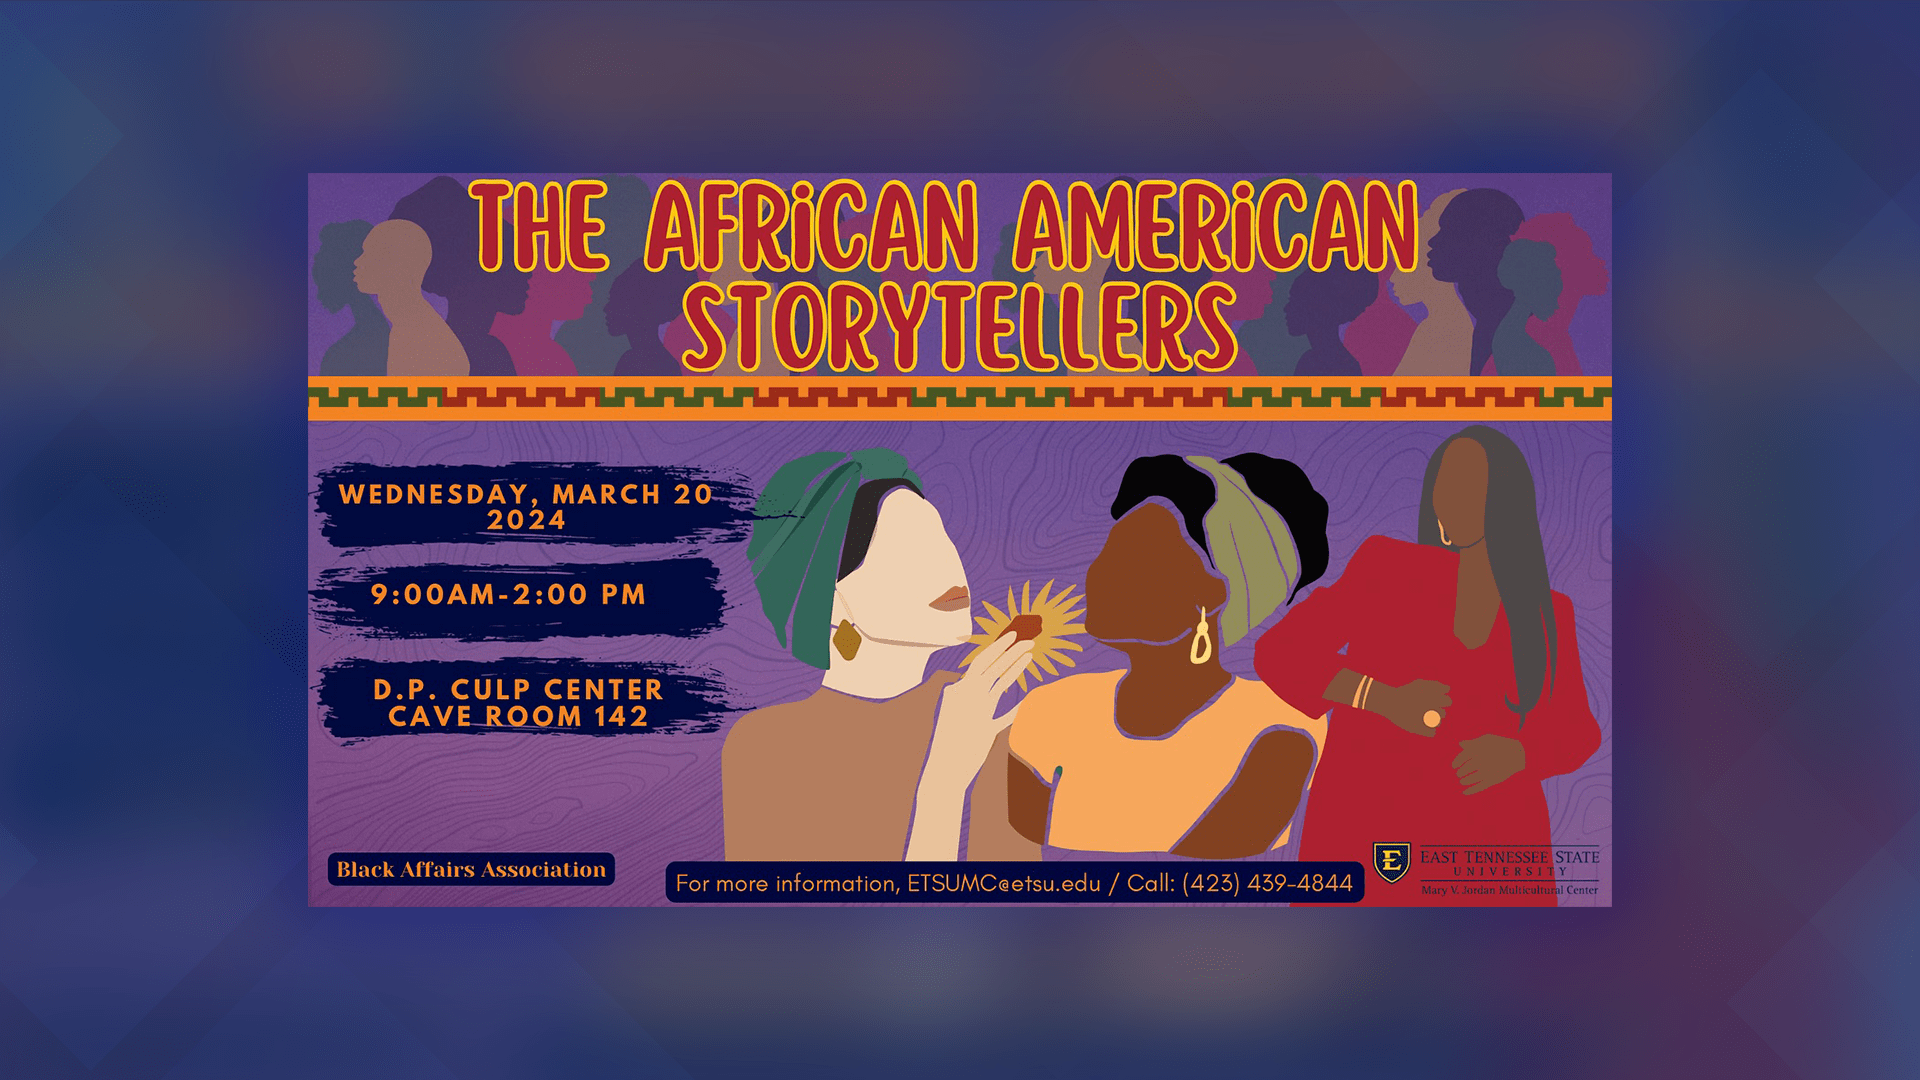 The African American Storytellers